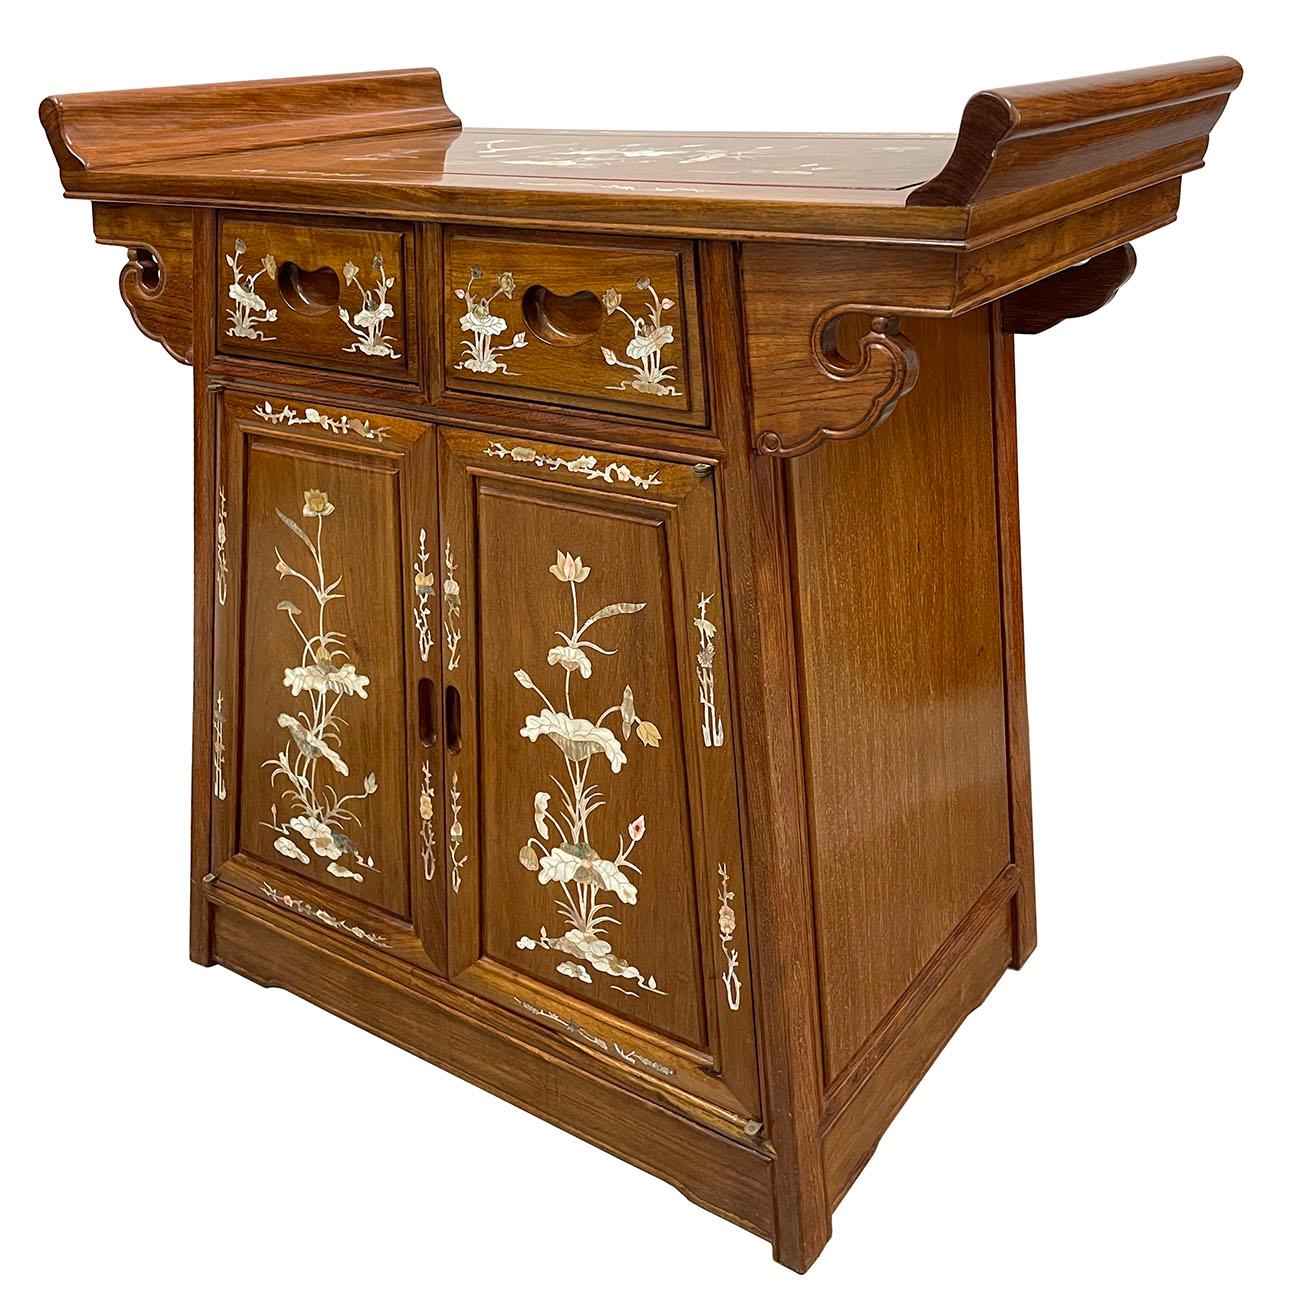 This gorgeous Chinese Antique carved Altar cabinet is made from hardwood with beautiful traditional Mother of pearl inlay of floral design on top and front cabinet. This cabinet has two drawers on the top and double open doors compartment on the